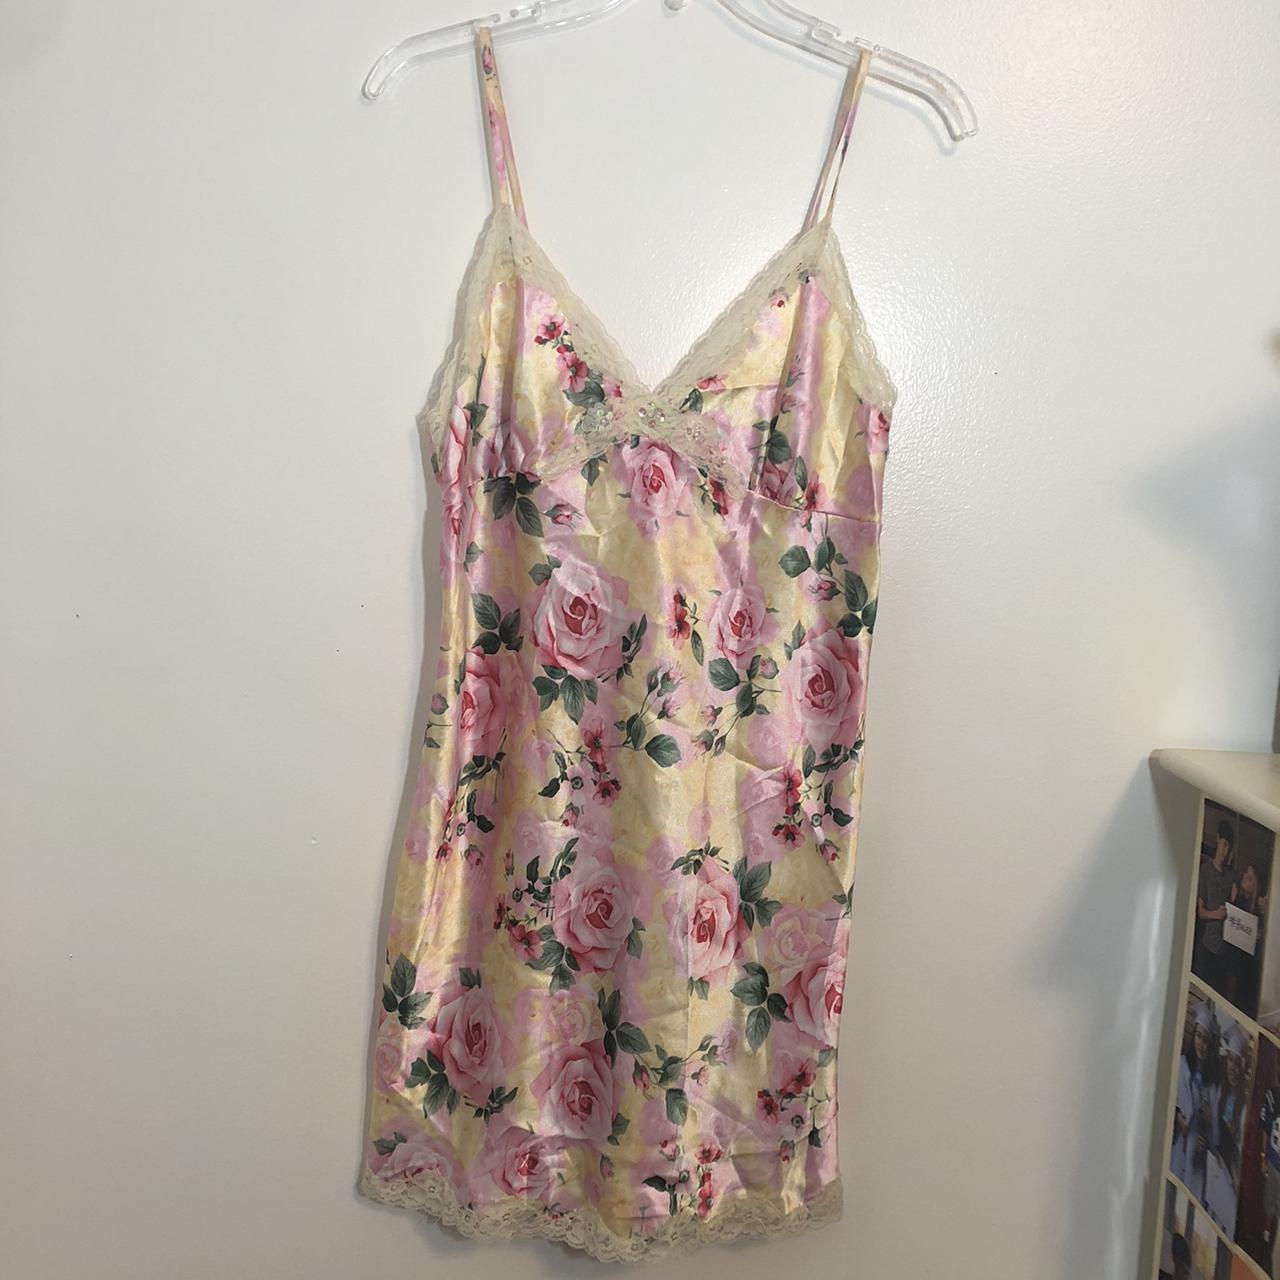 Product Image 1 - pink floral slip dress 💕

in